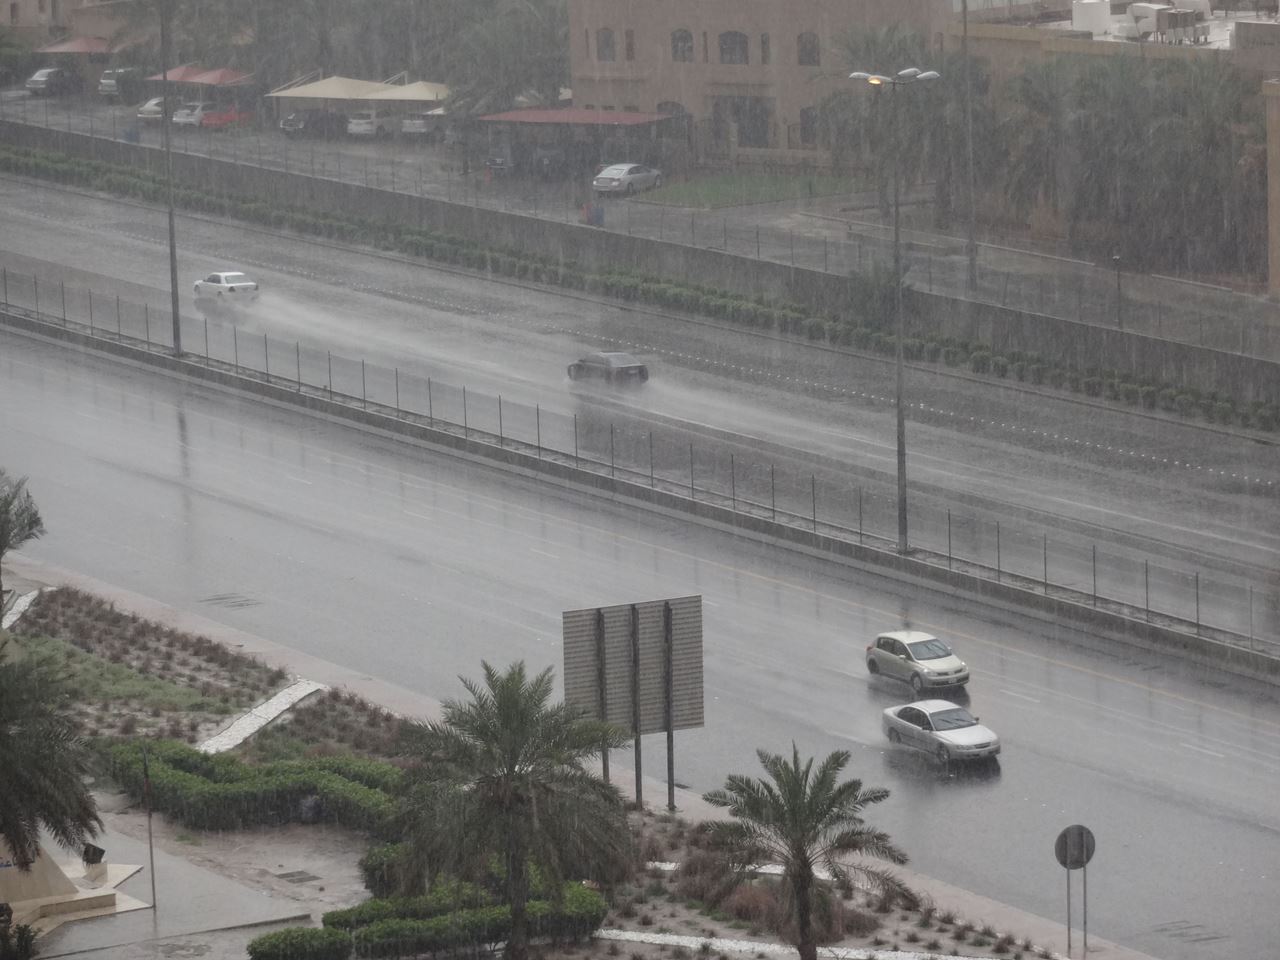 A Rainy morning in Kuwait